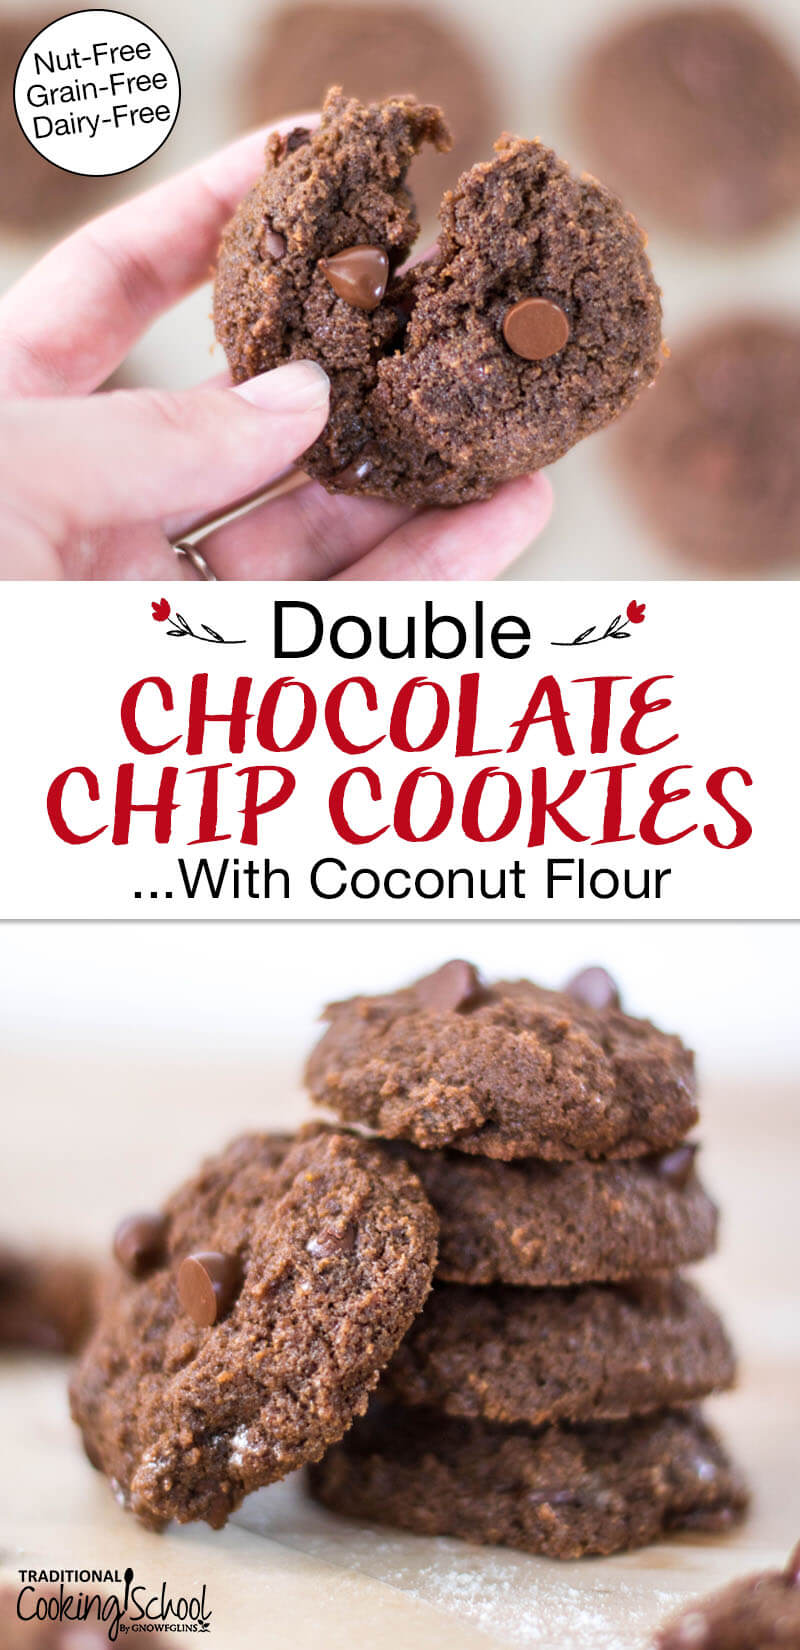 Photo collage of a stack of chocolate cookies and one cookie broken in half to show the soft texture. Text overlay says: "Double Chocolate Chip Cookies ...With Coconut Flour (Nut-Free Grain-Free Dairy-Free)"